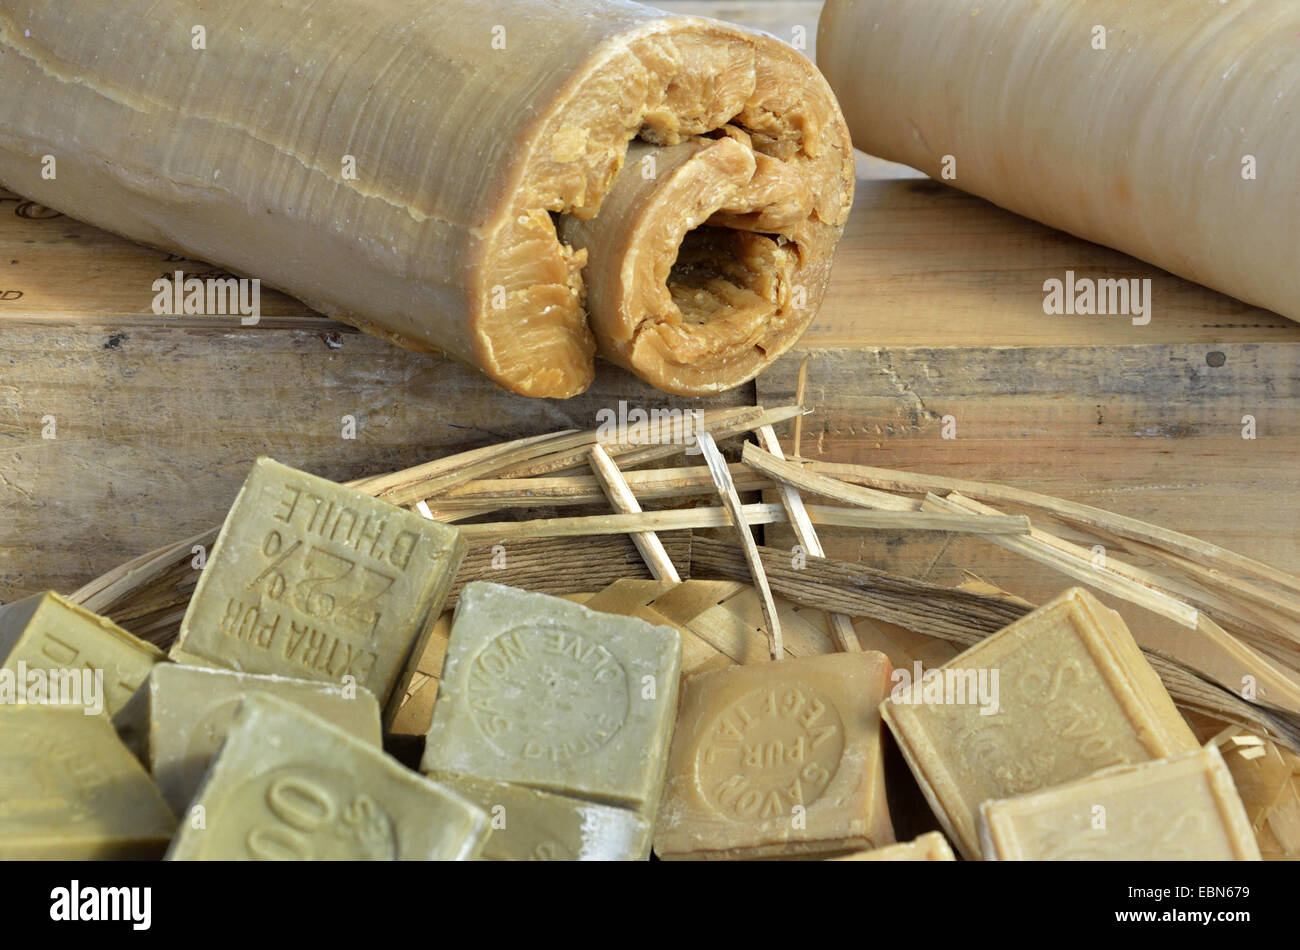 bars of soap and coiled slabs of the traditional Marseille soap on a weekly market, France, Brittany Stock Photo